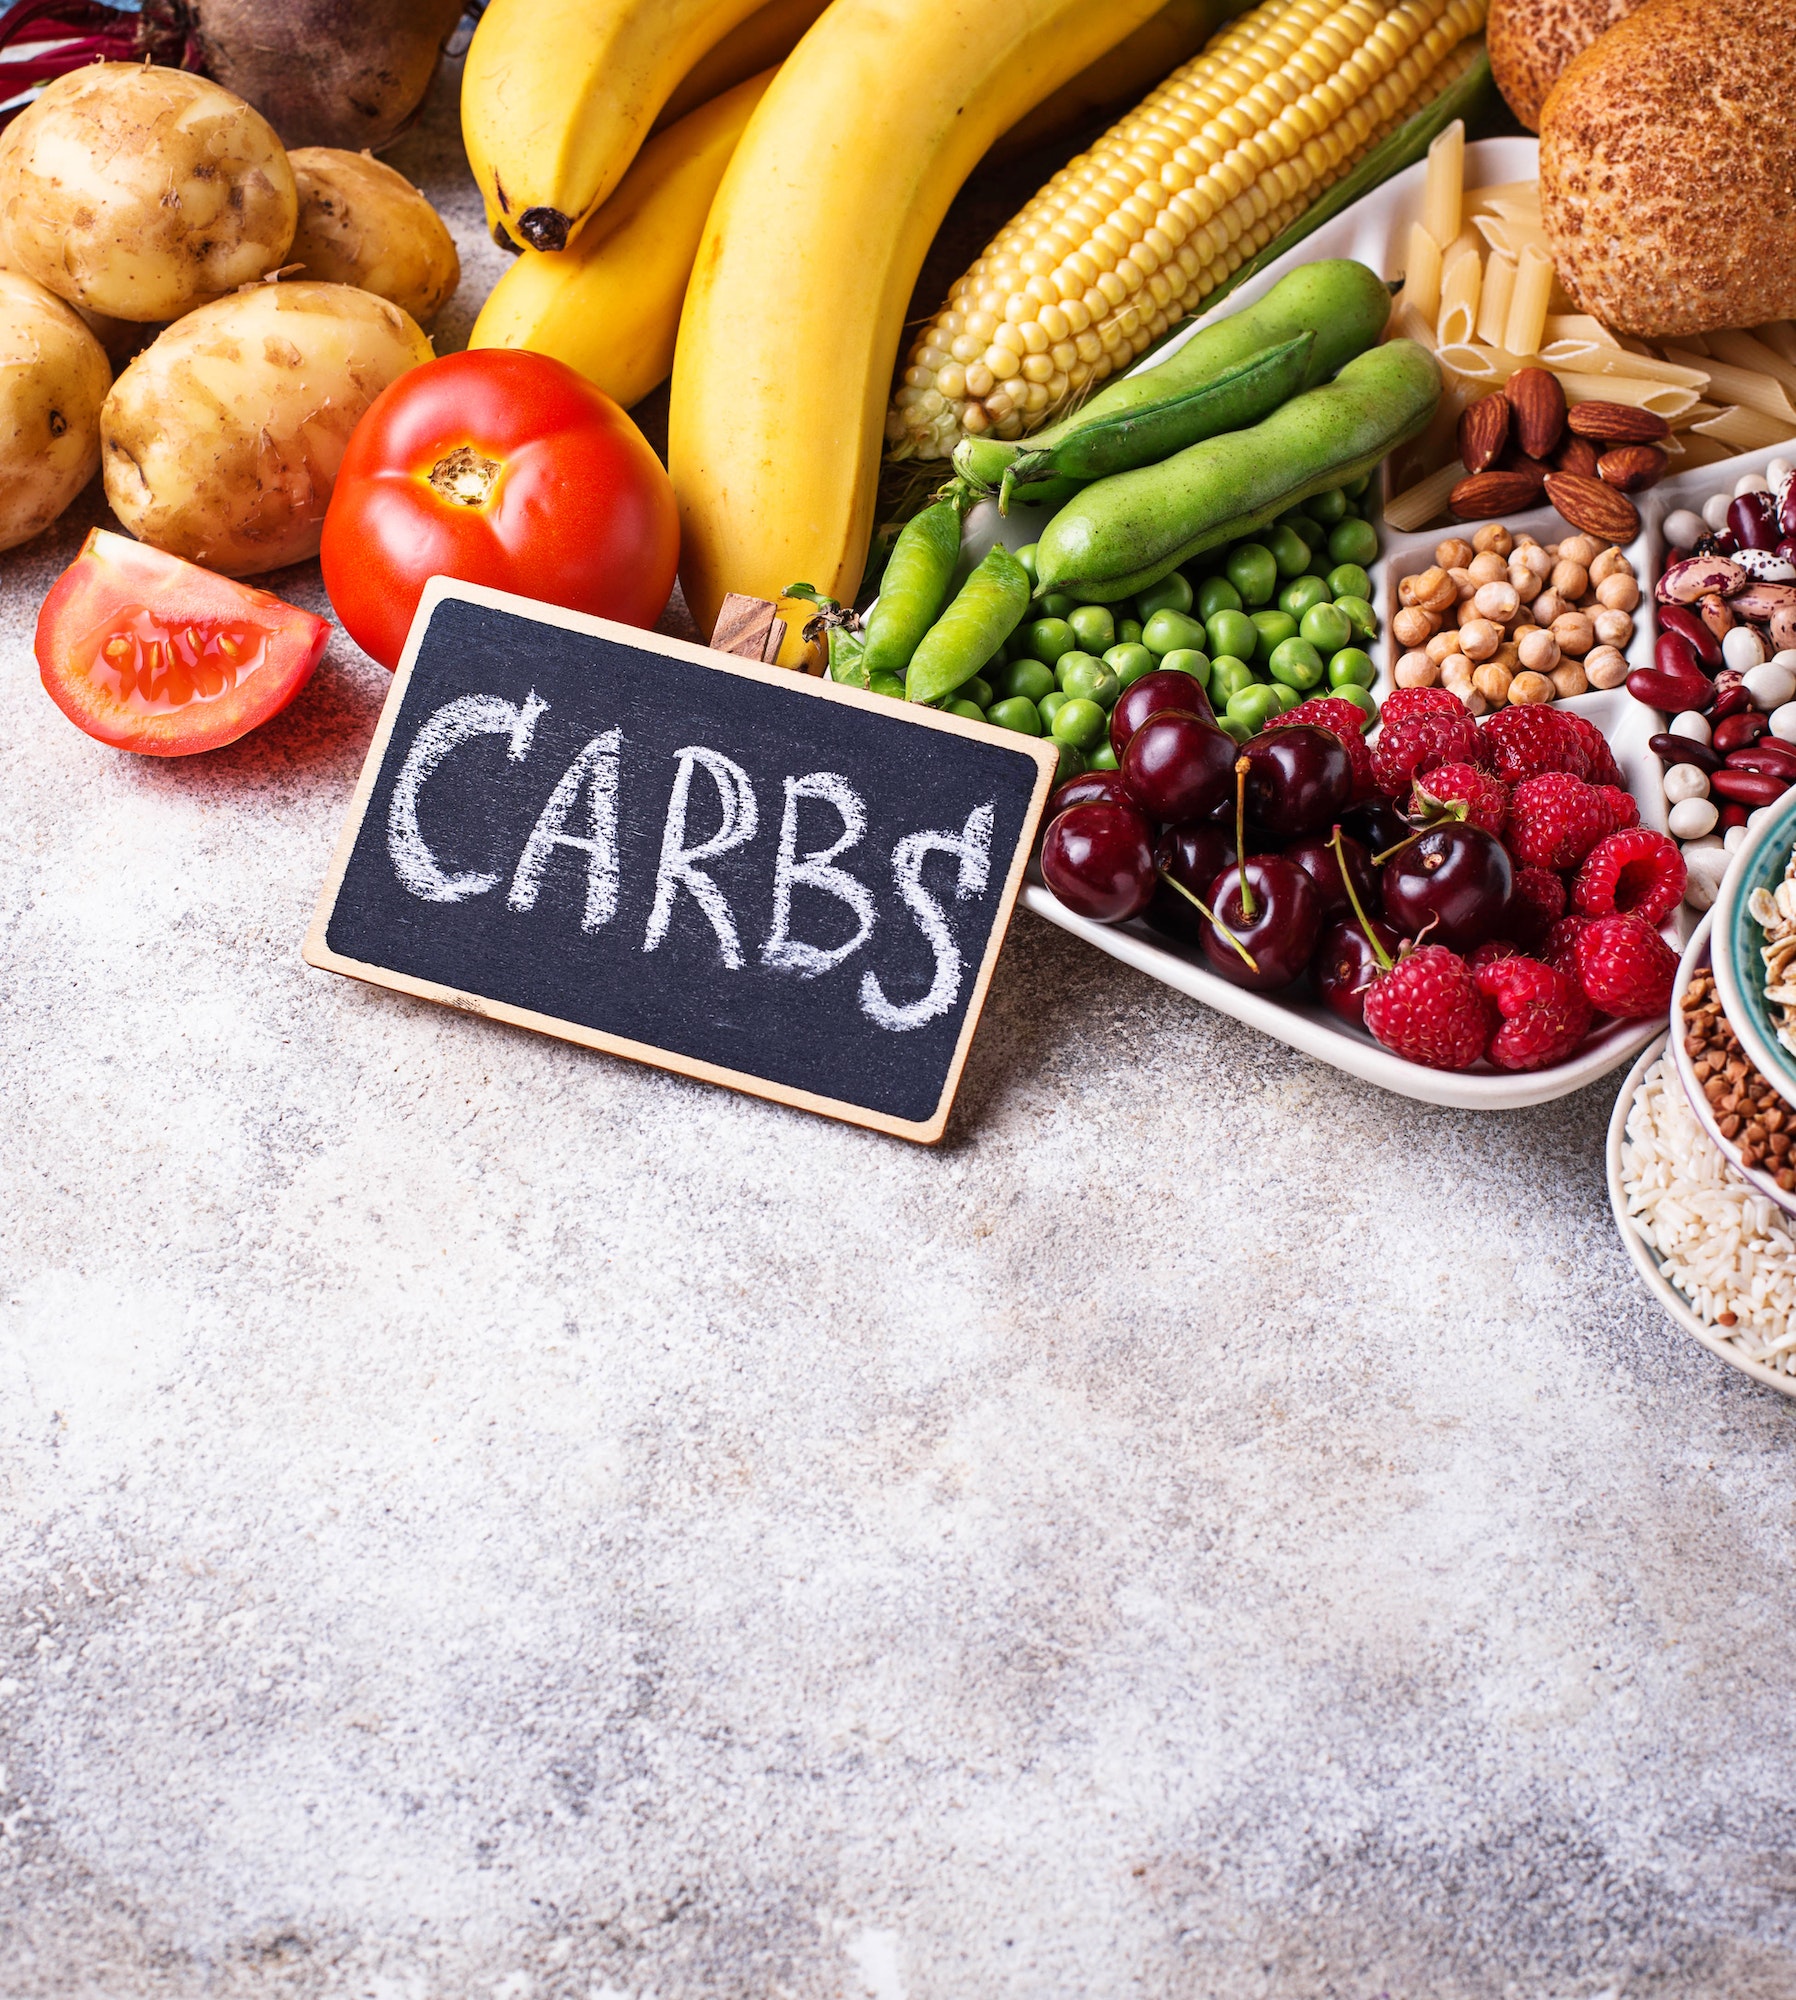 Healthy products sources of carbohydrates.